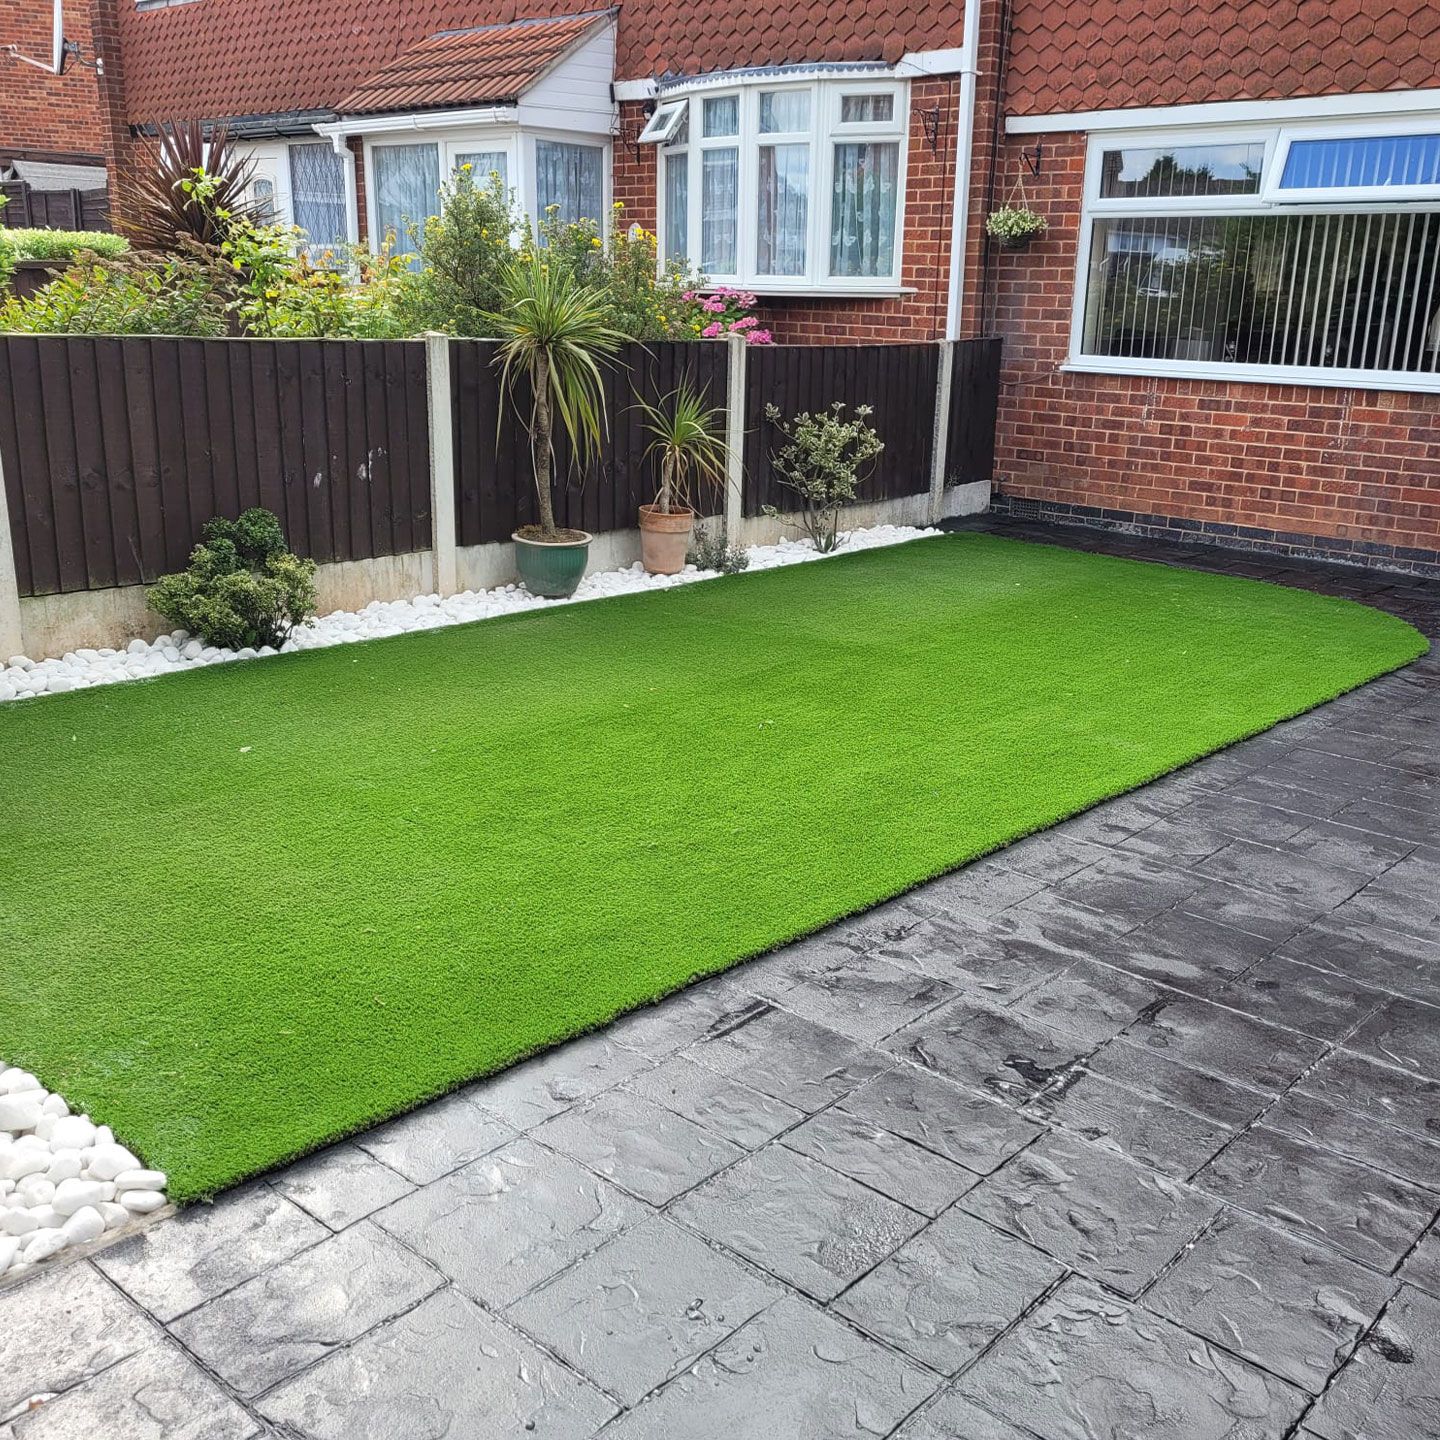 landscaping in Dunchurch showing new artificial grass and patterned concrete paving